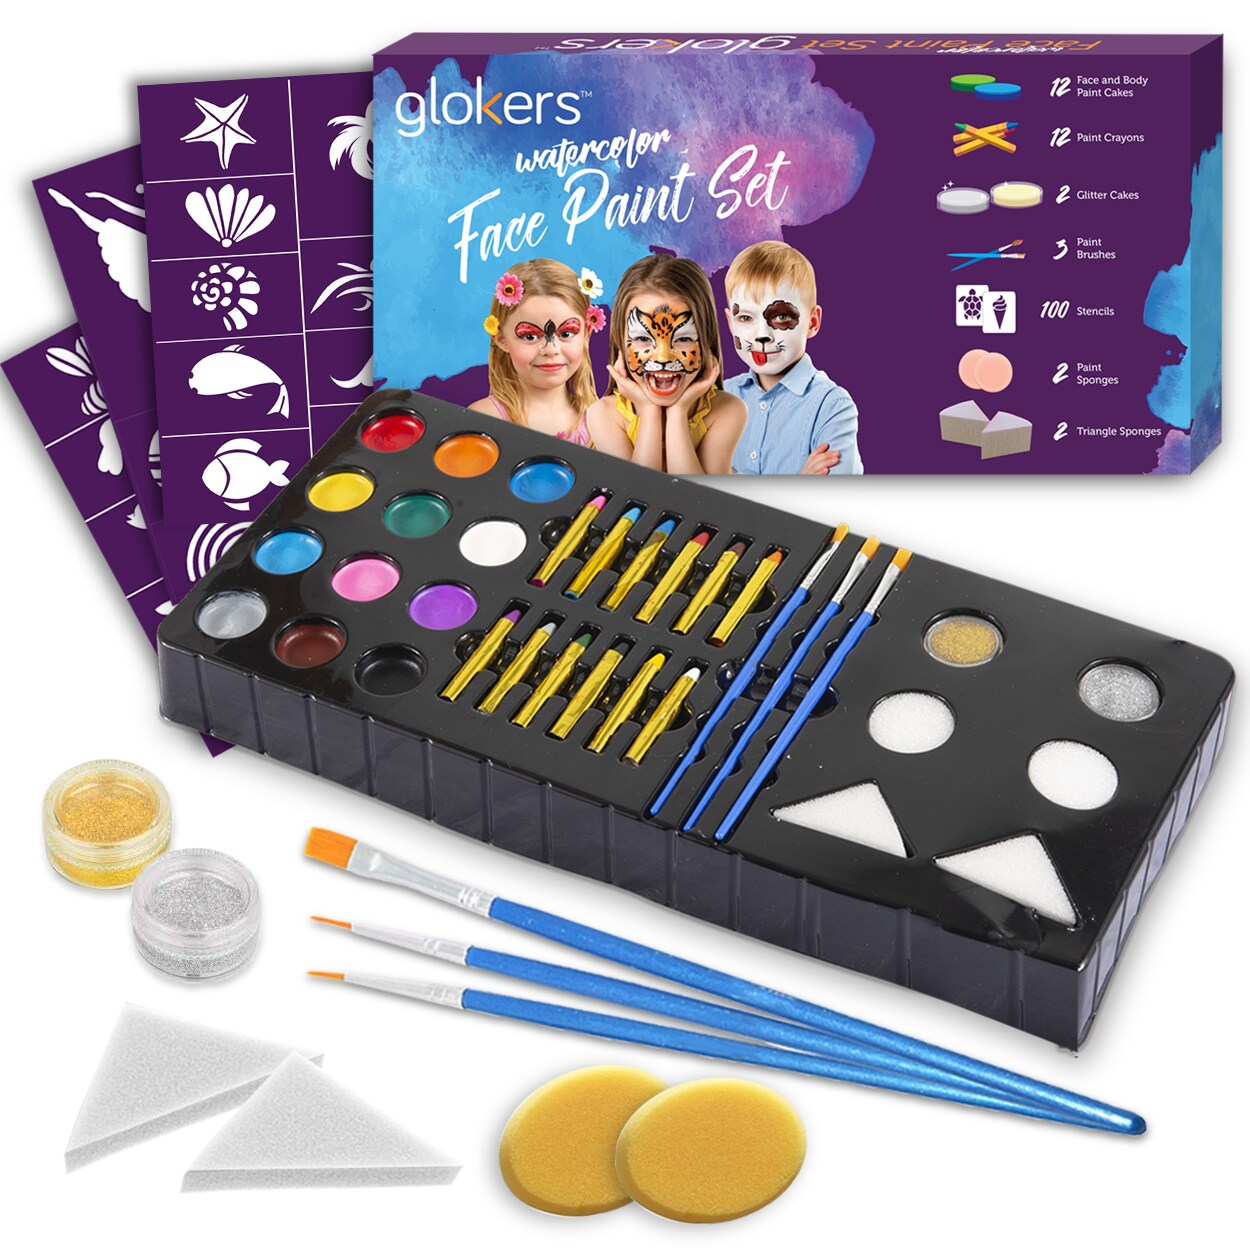 Glokers Face and Body Crayons Set - 12 Colors Washable, Non-Toxic